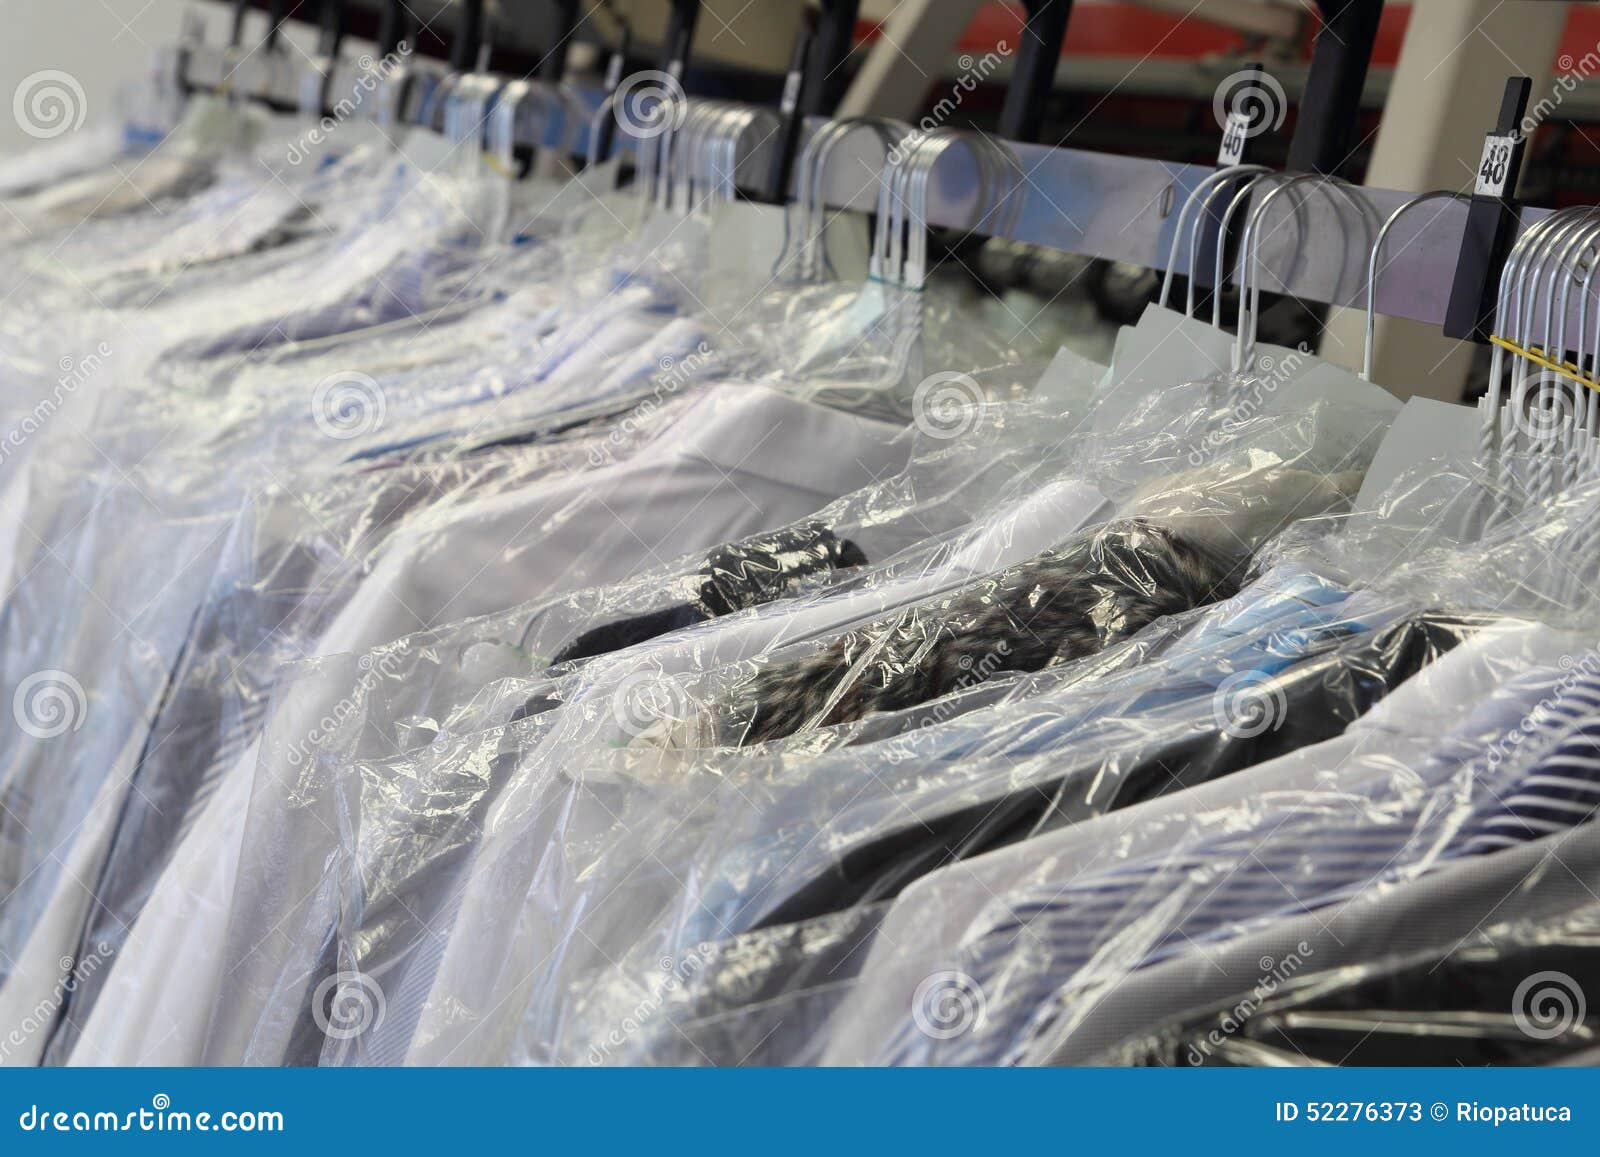 Clothes Rack in a Dry Cleaning Stock Image - Image of training, laundry ...